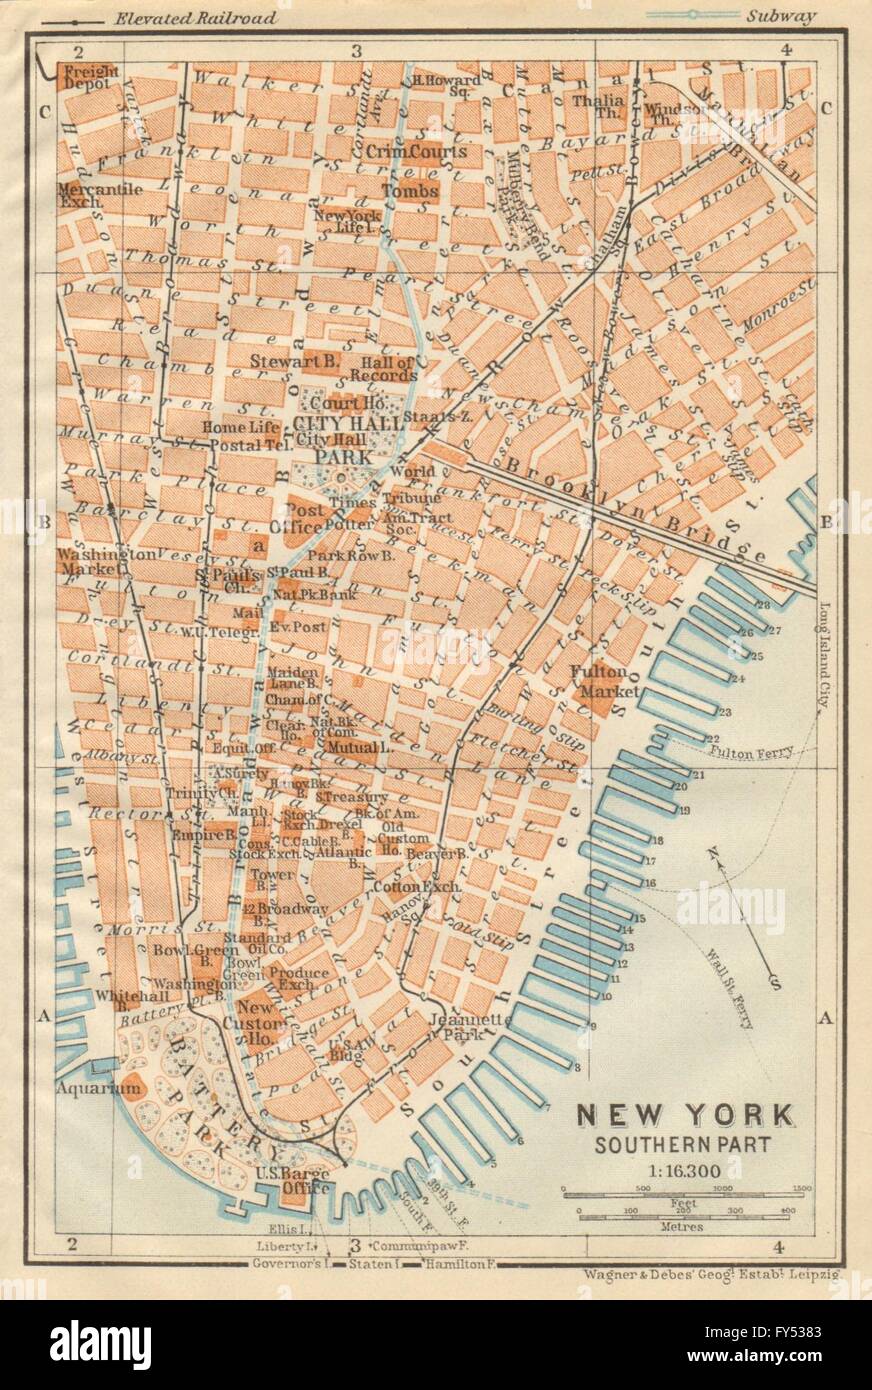 LOWER MANHATTAN Financial District Tribeca Battery Park. NYC City plan, 1904 map Stock Photo